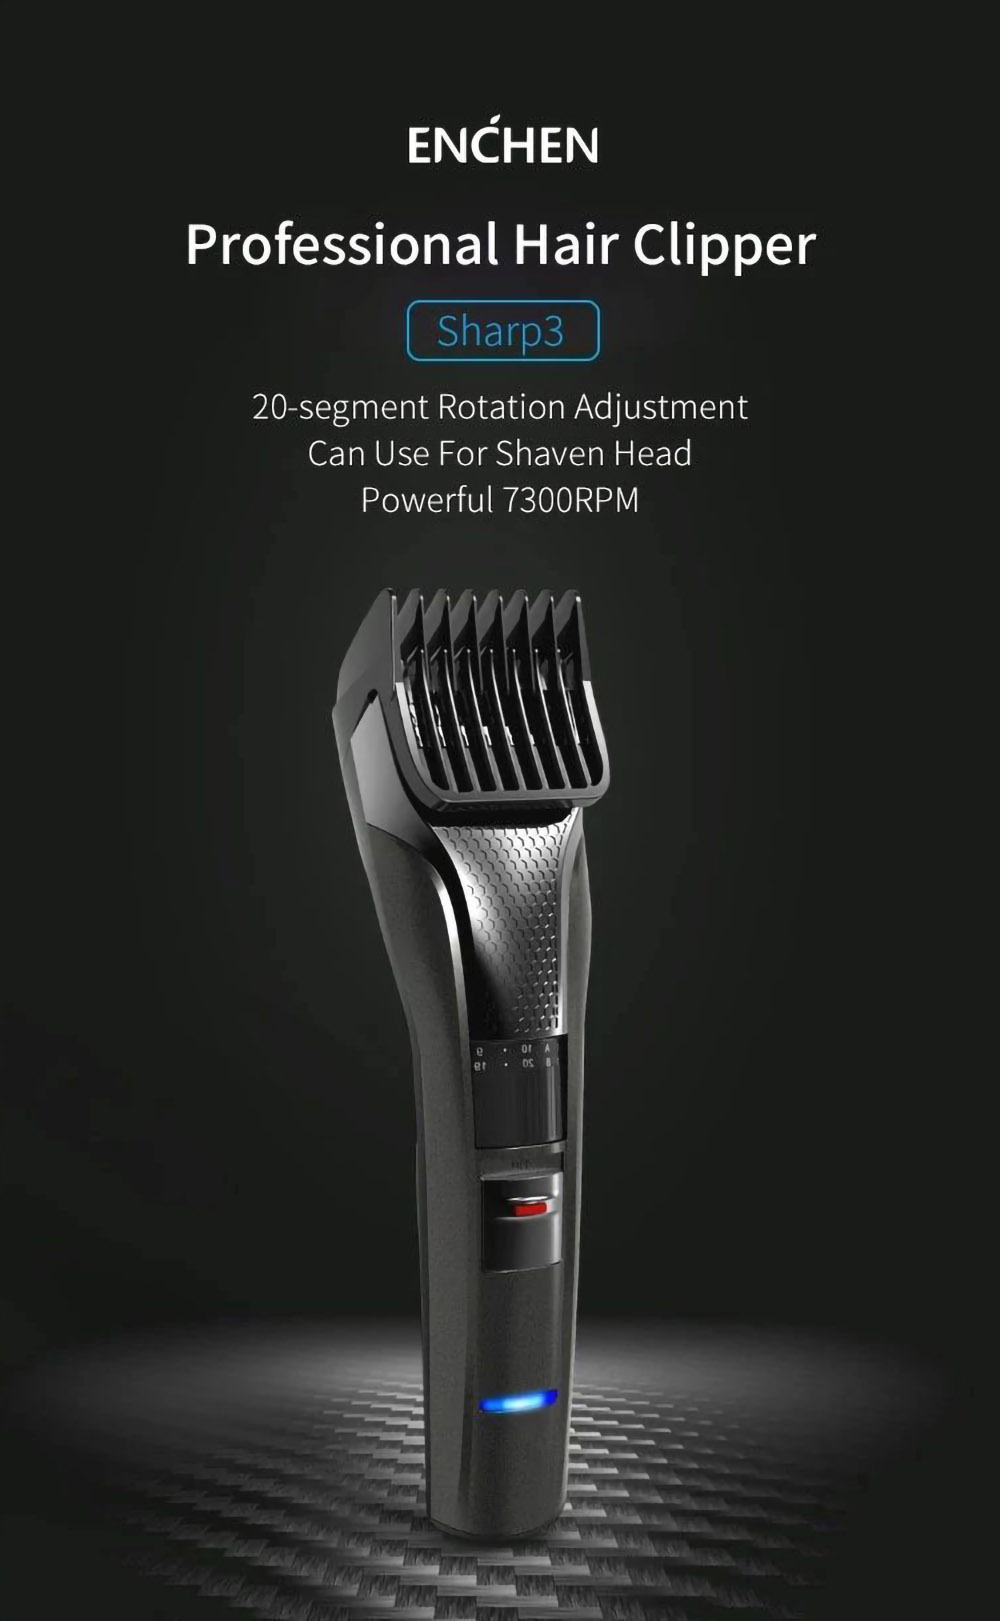 ENCHEN Sharp3 Electric Hair Clipper 7300RPM Powerful Professional Rechargeable Cordless Hair Trimmer